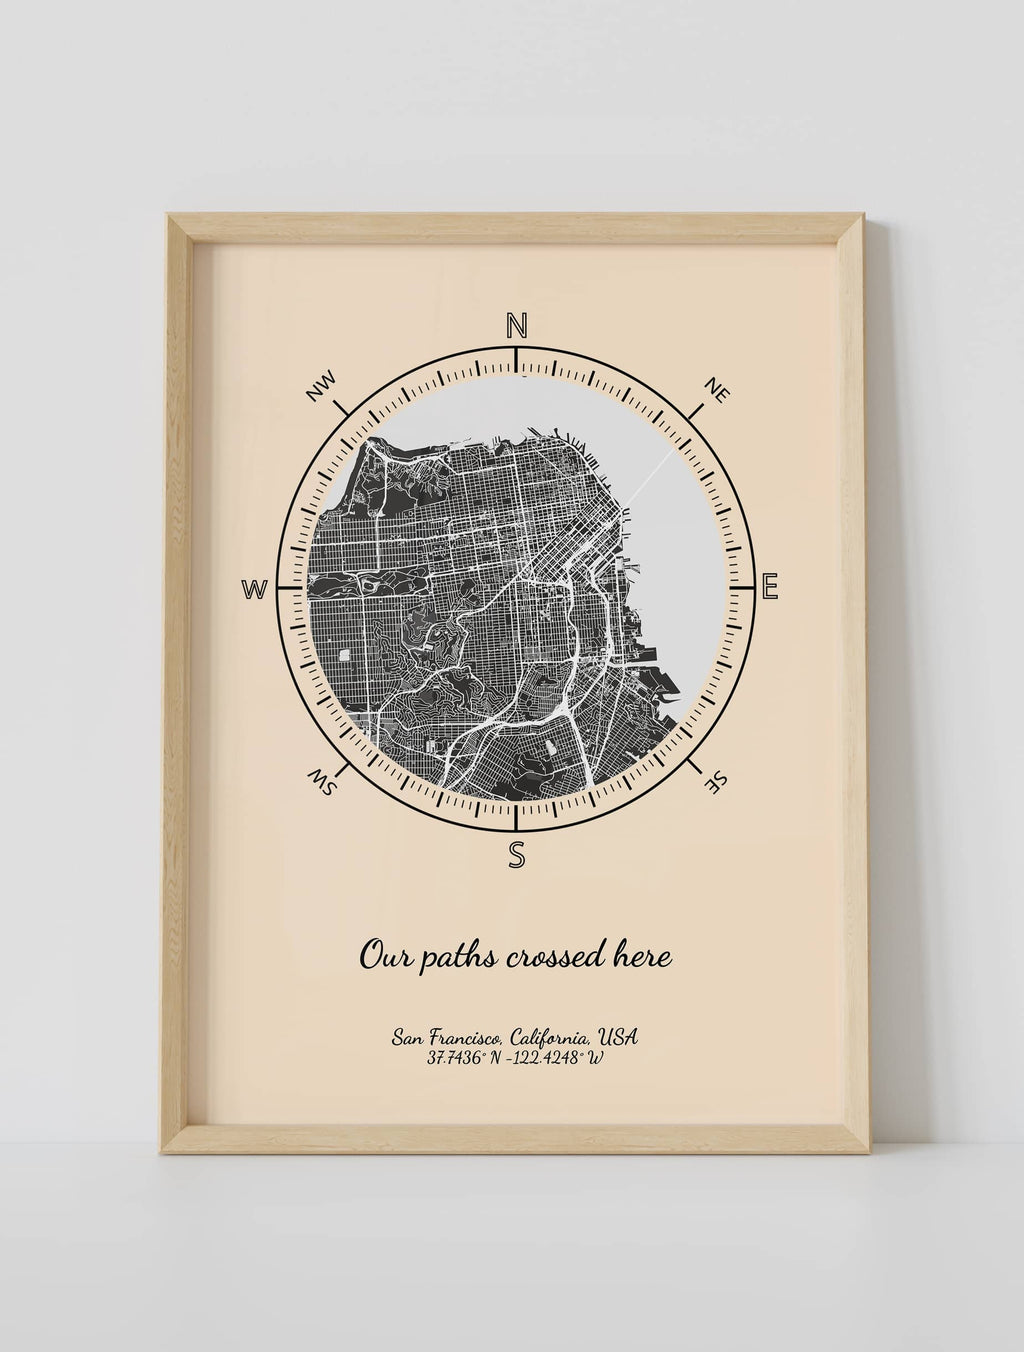 Our paths crossed here custom framed locationmap by artmementos